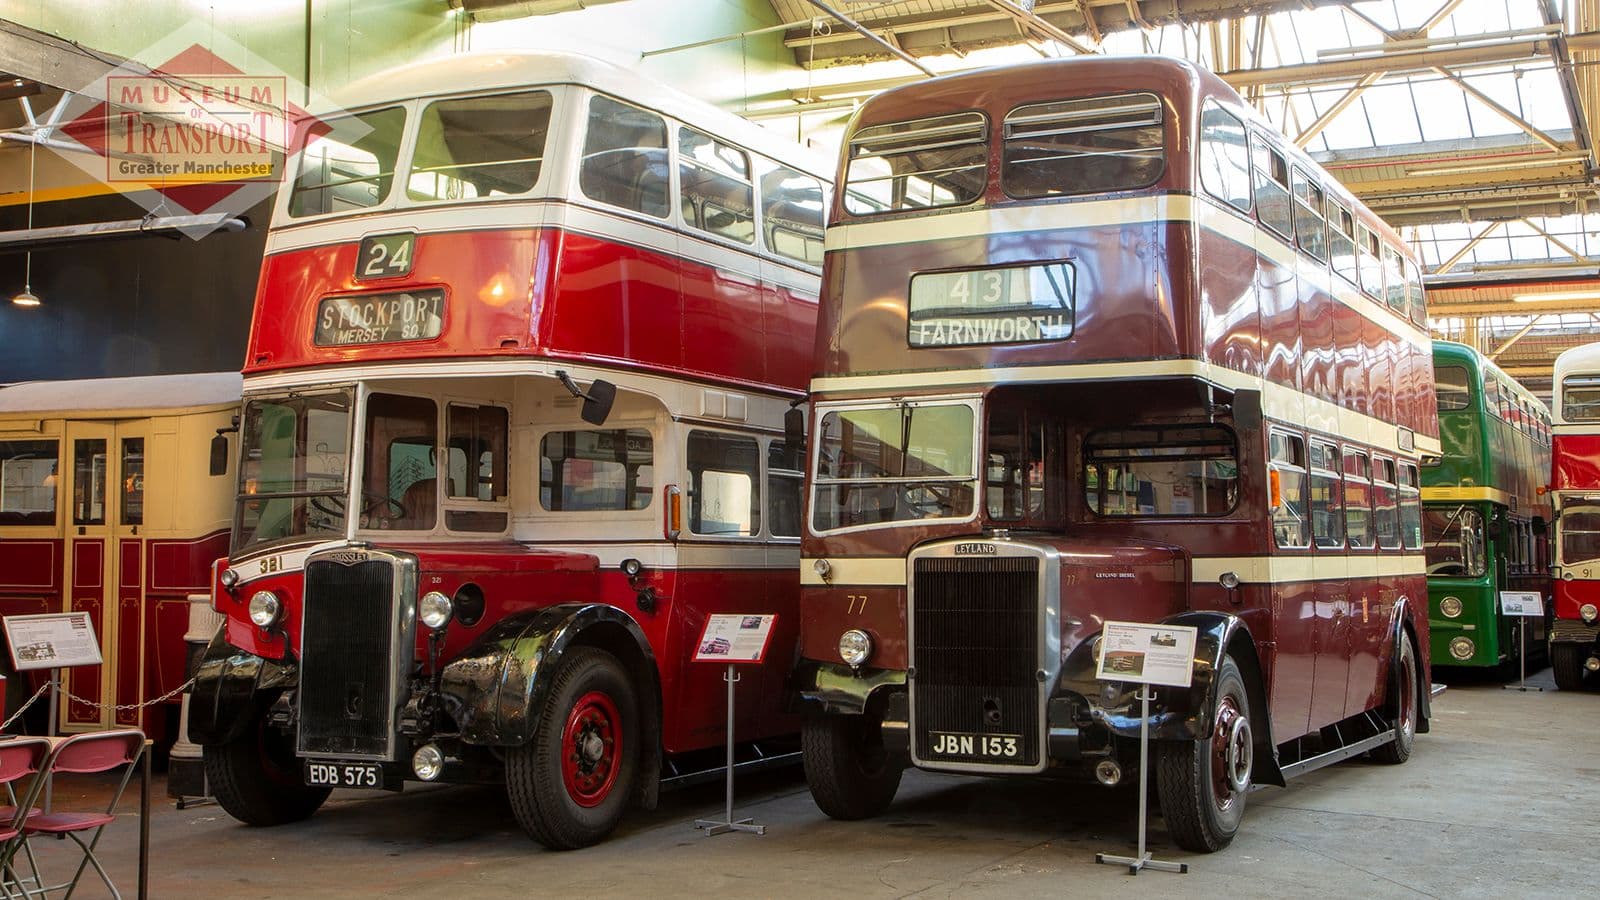 museum  of Transport Greater Manchester